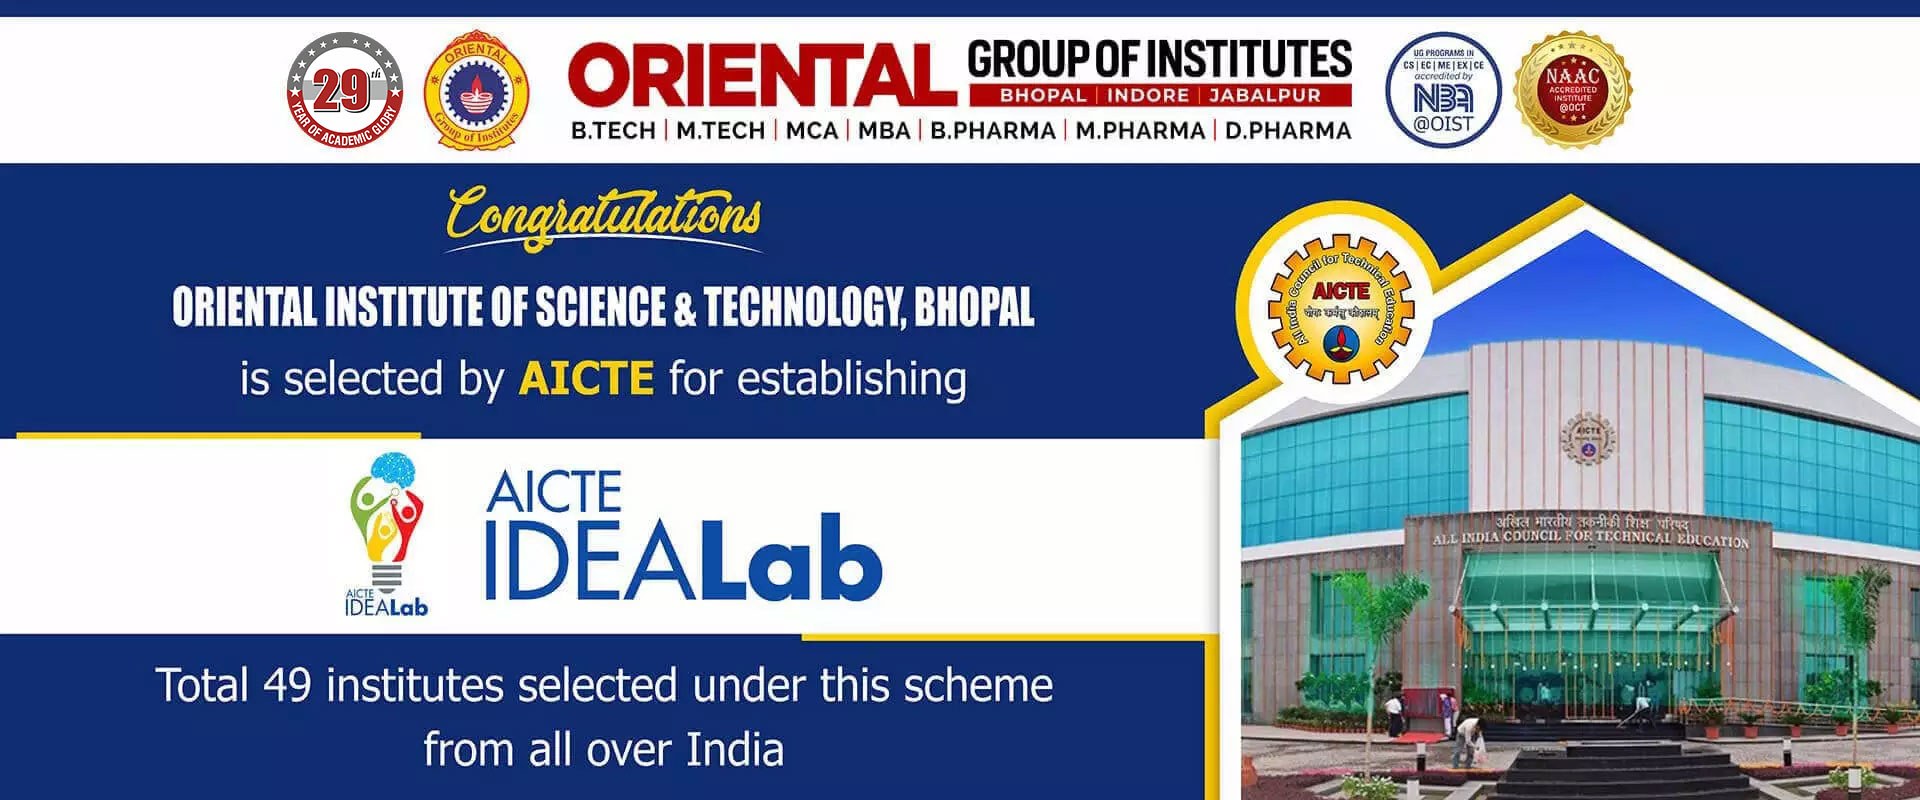 Admission - Oriental Group of Institutes